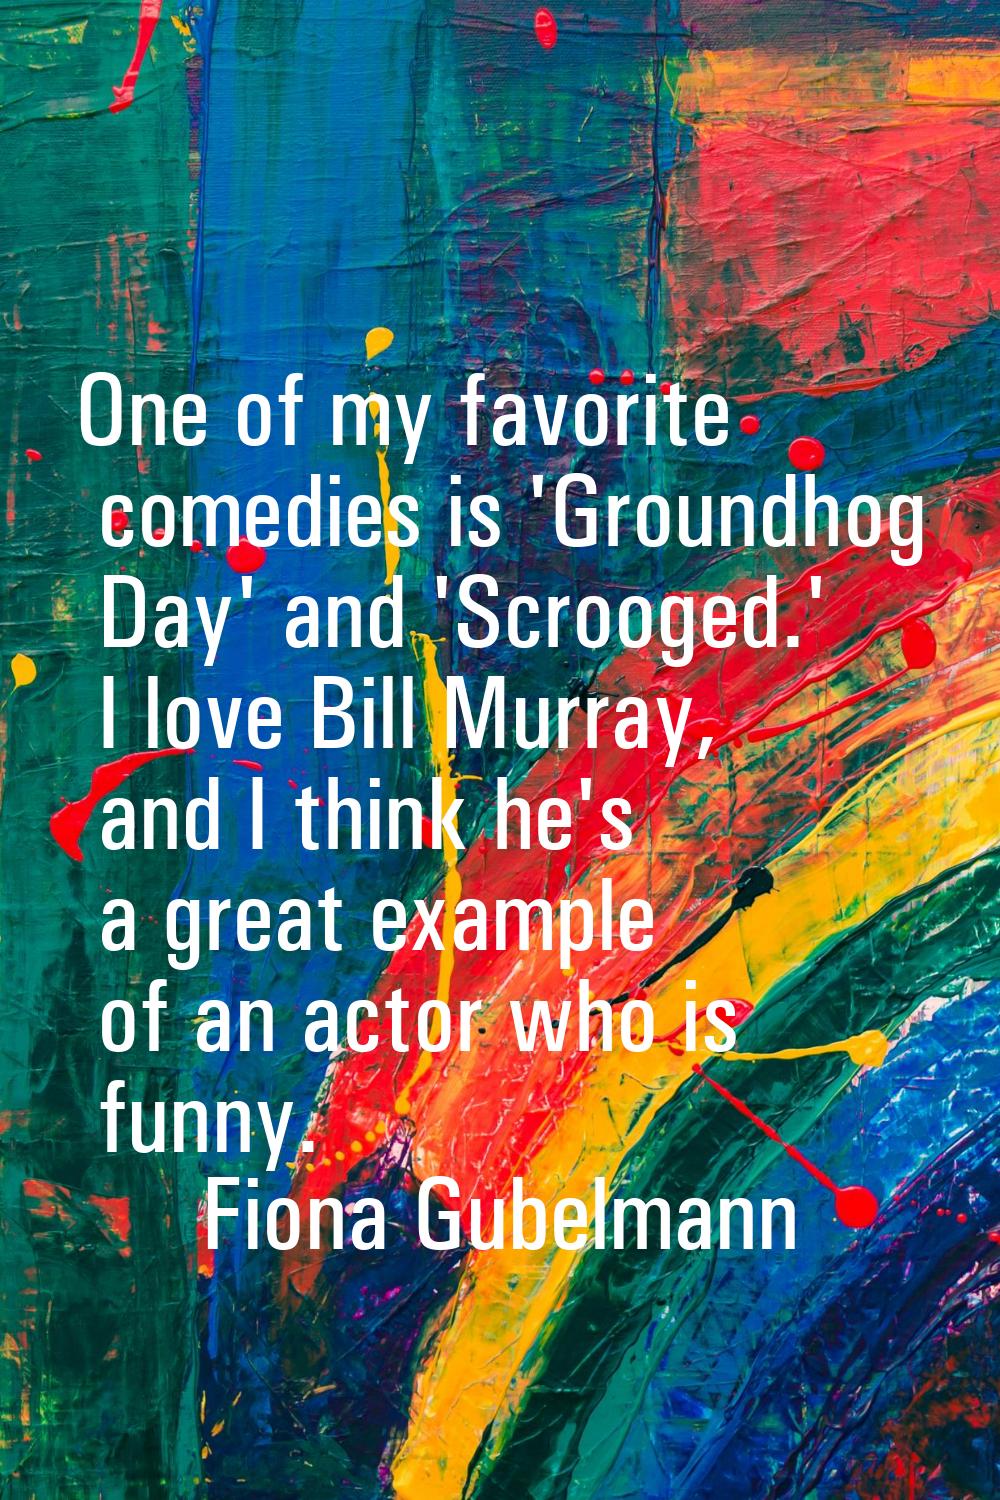 One of my favorite comedies is 'Groundhog Day' and 'Scrooged.' I love Bill Murray, and I think he's